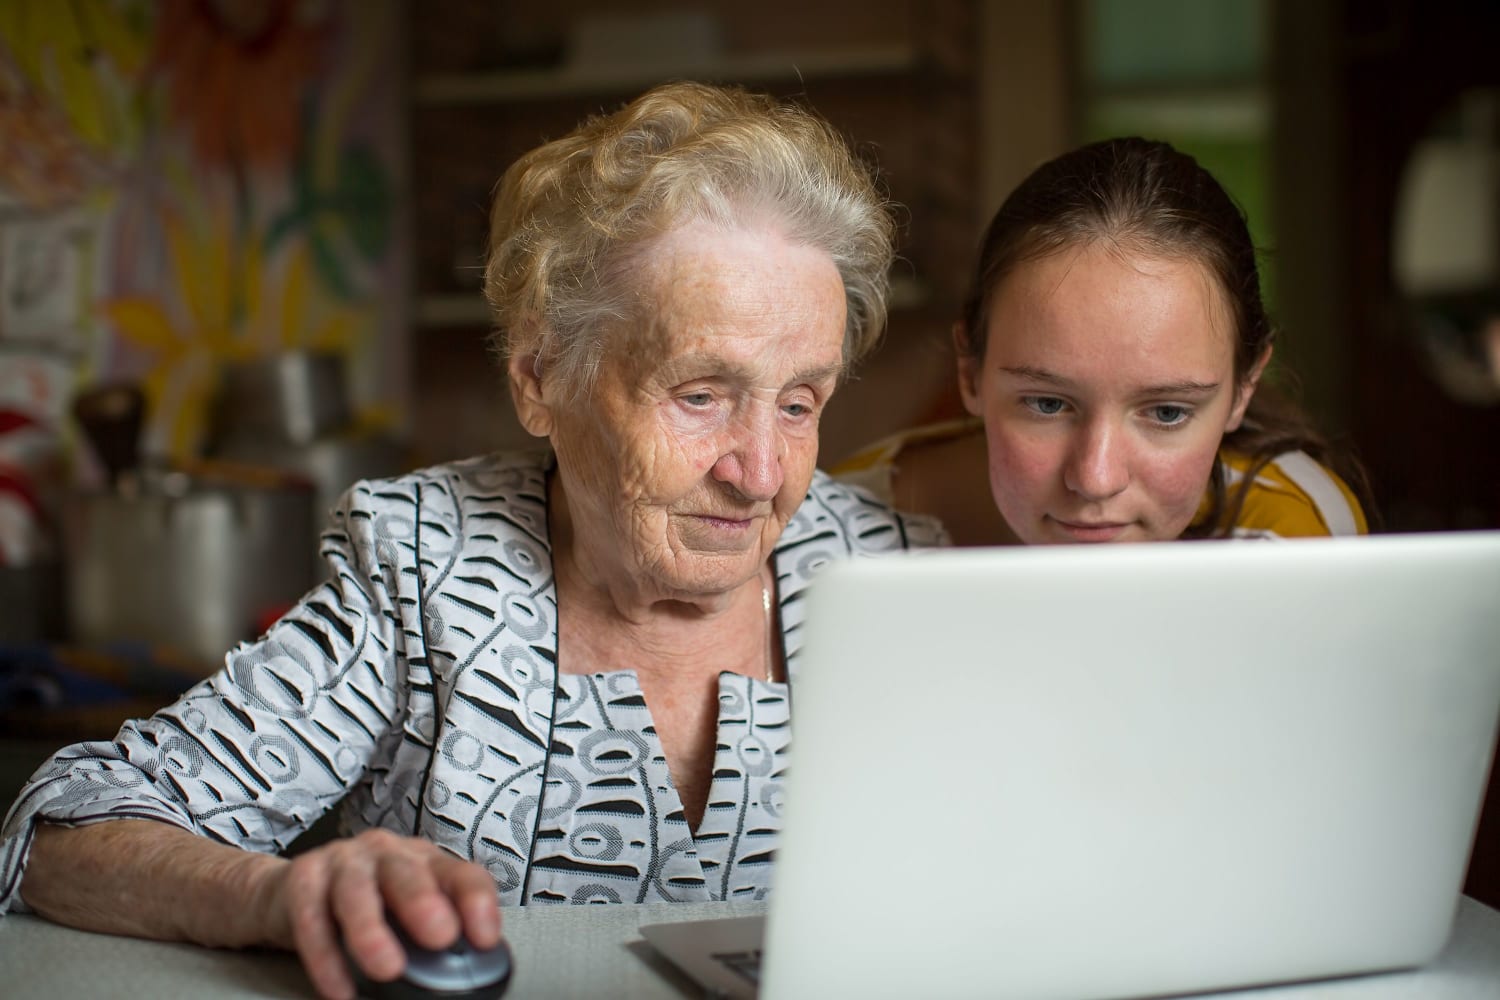 Older person with a young person looking at a laptop